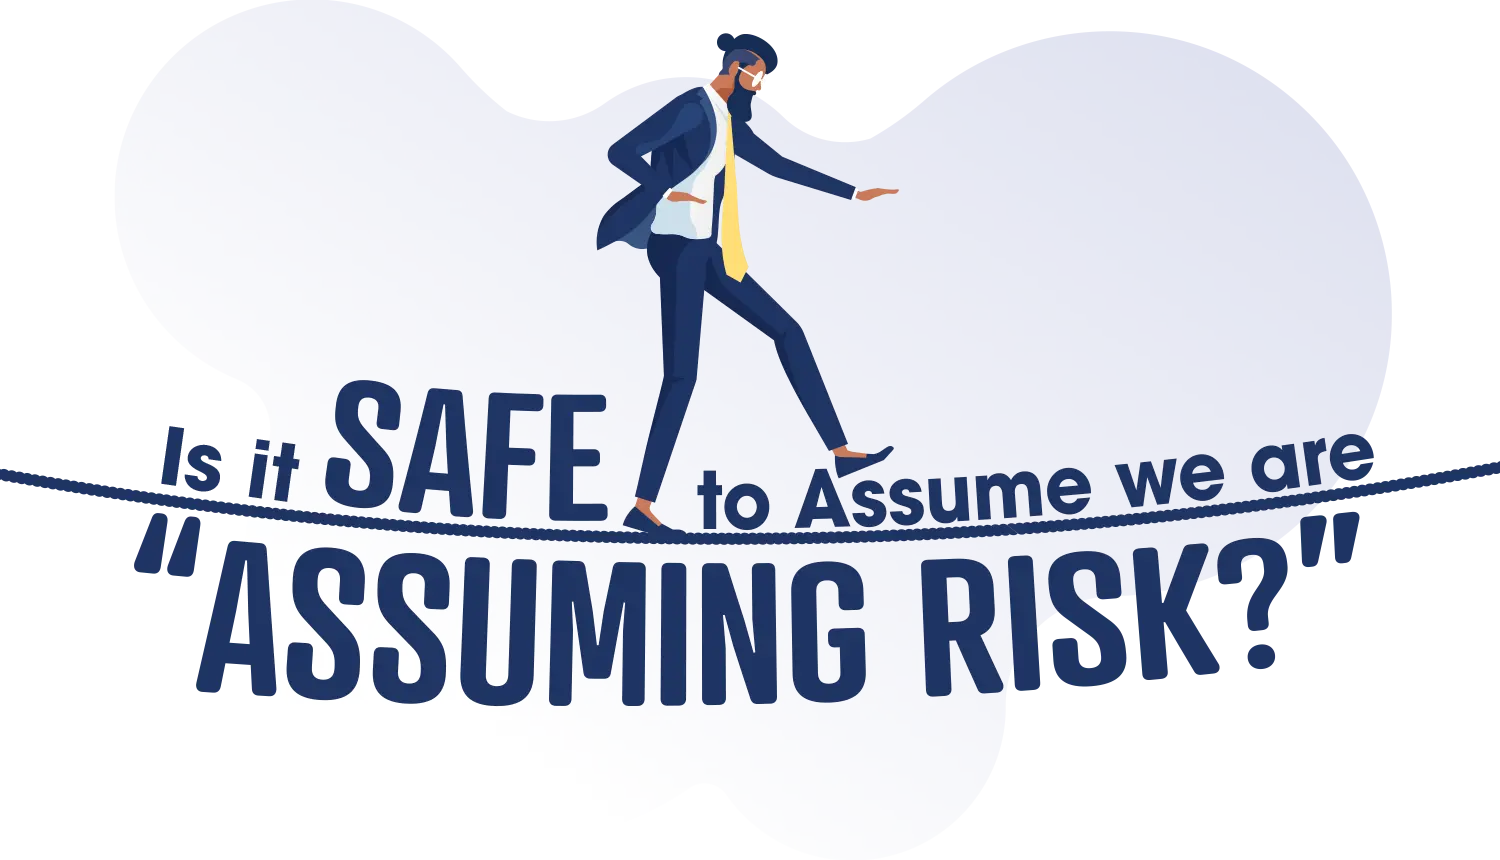 Is it Safe to Assume we are Assuming Risk with vector illustration of a man balancing on a tightrope